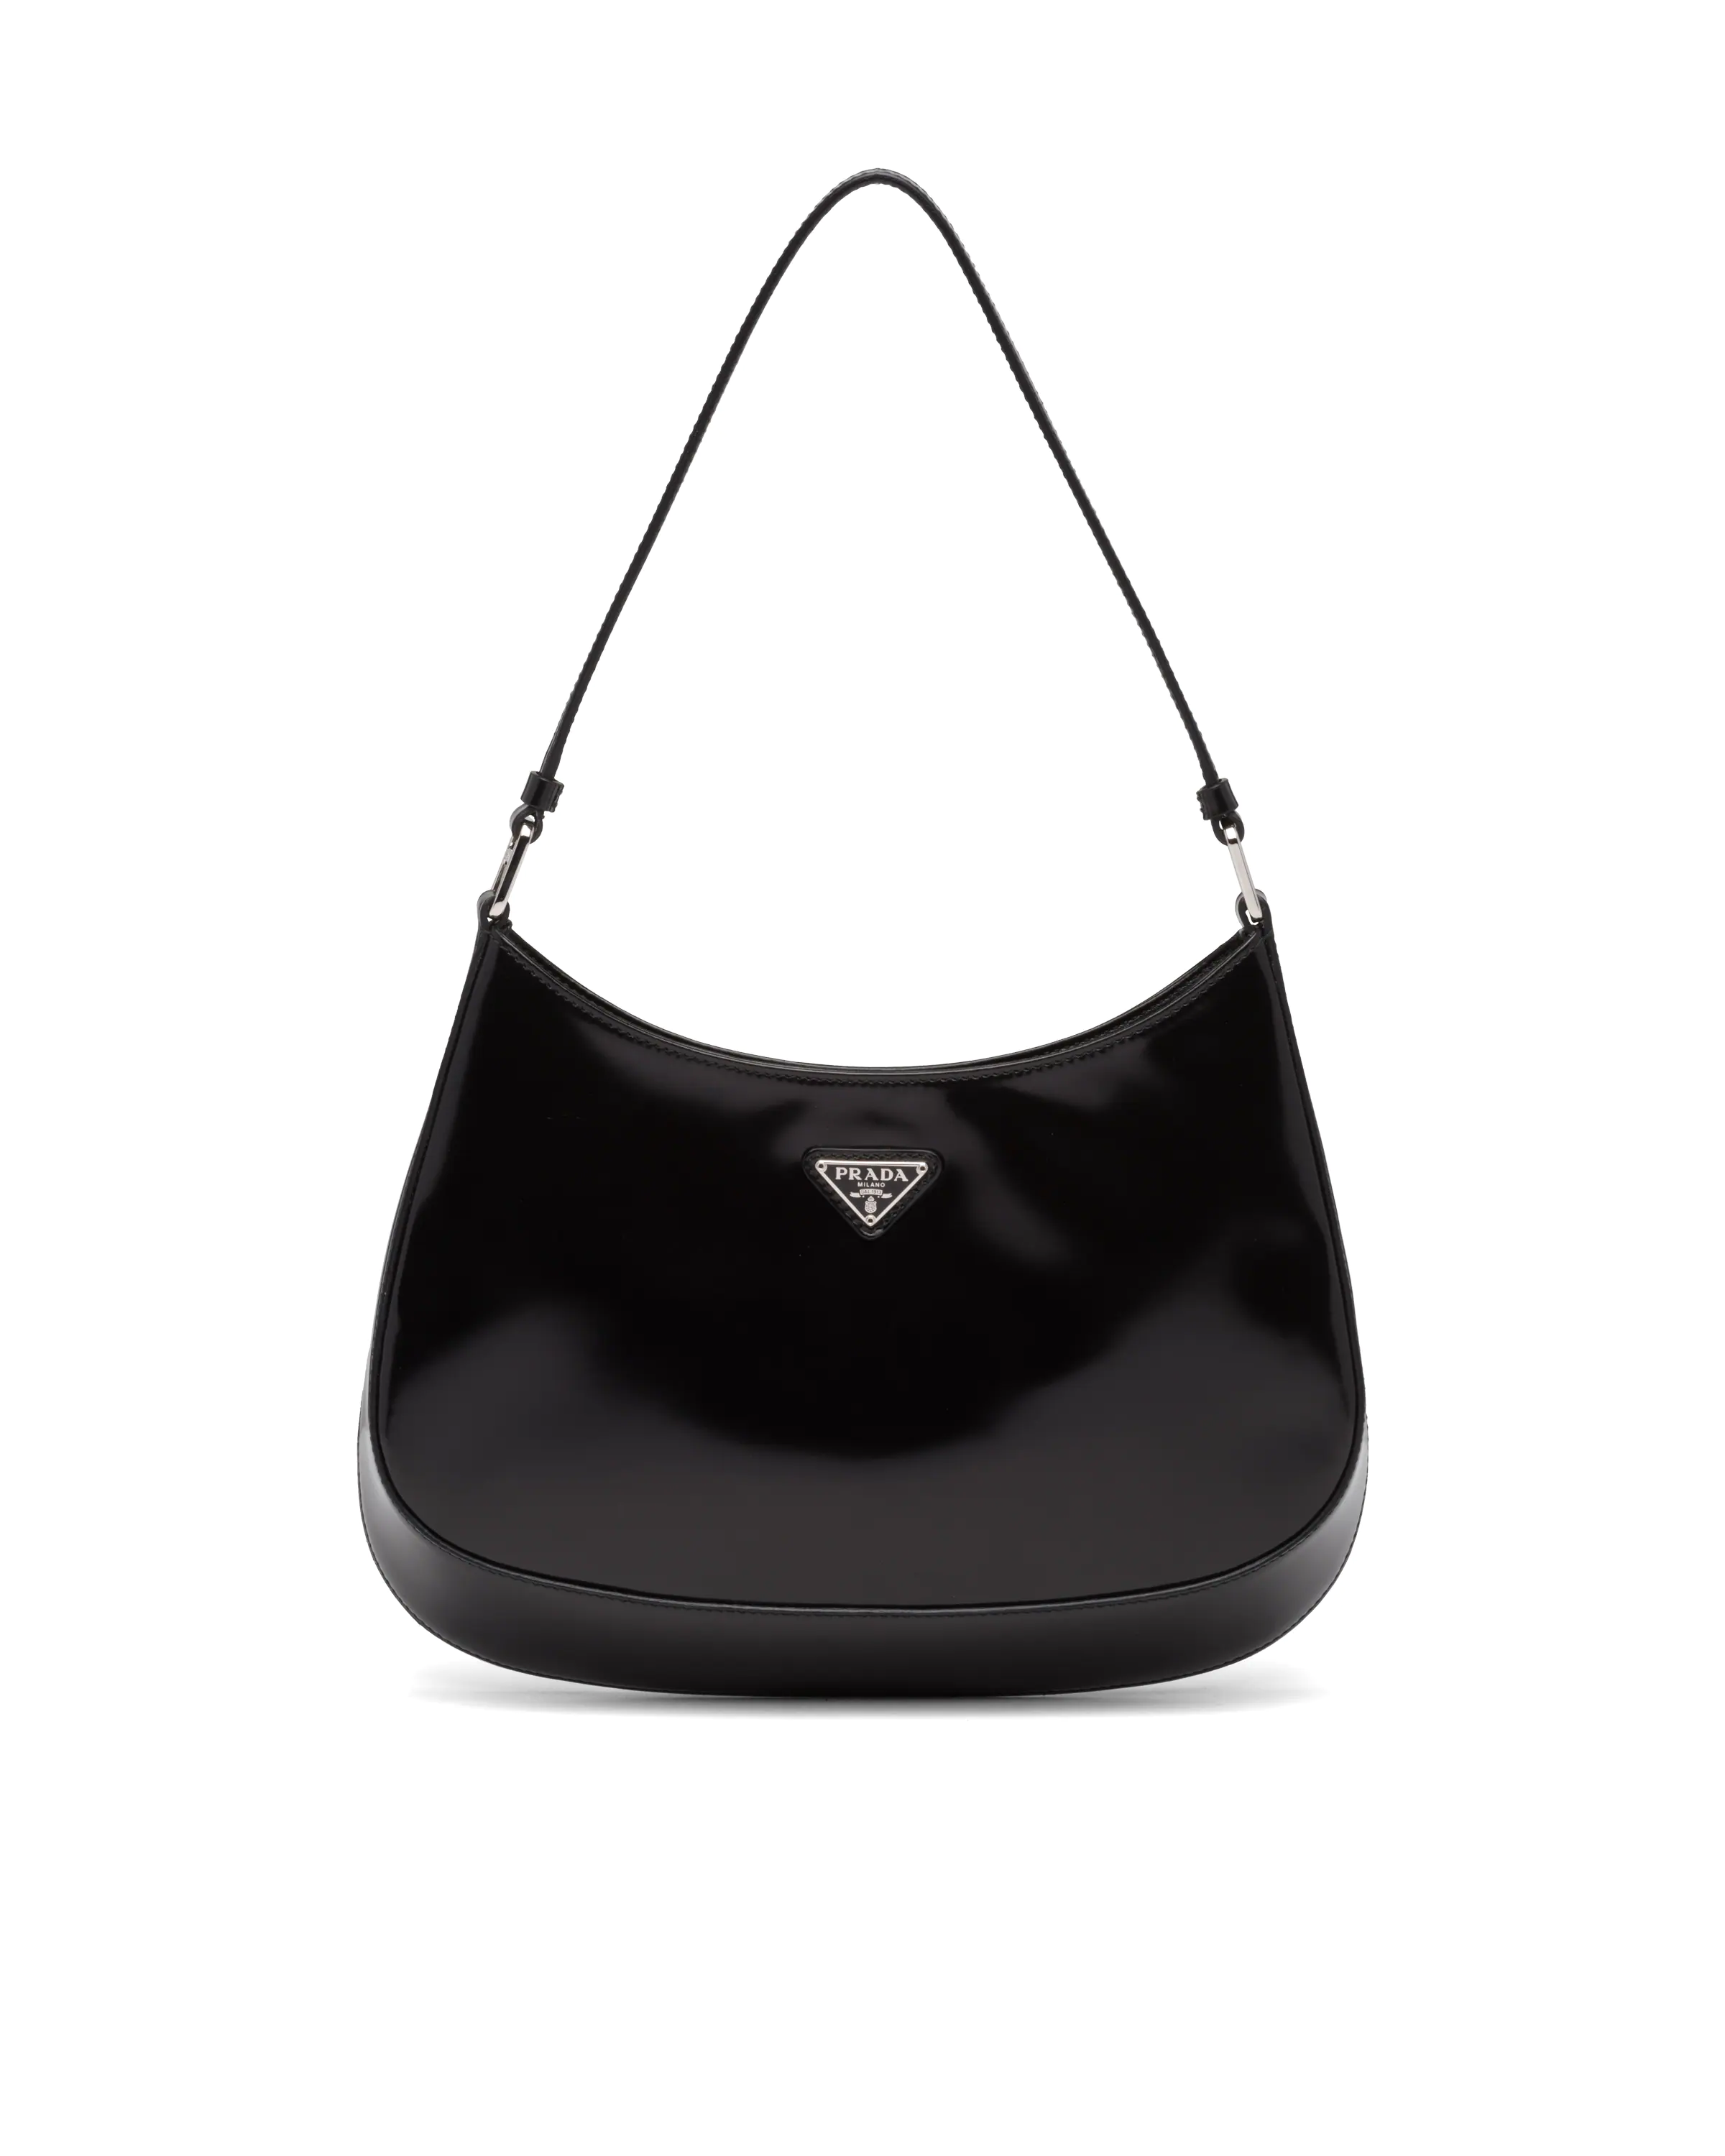 31 Best Prada Bags of All Time That Are Worth the Investment - Glowsly